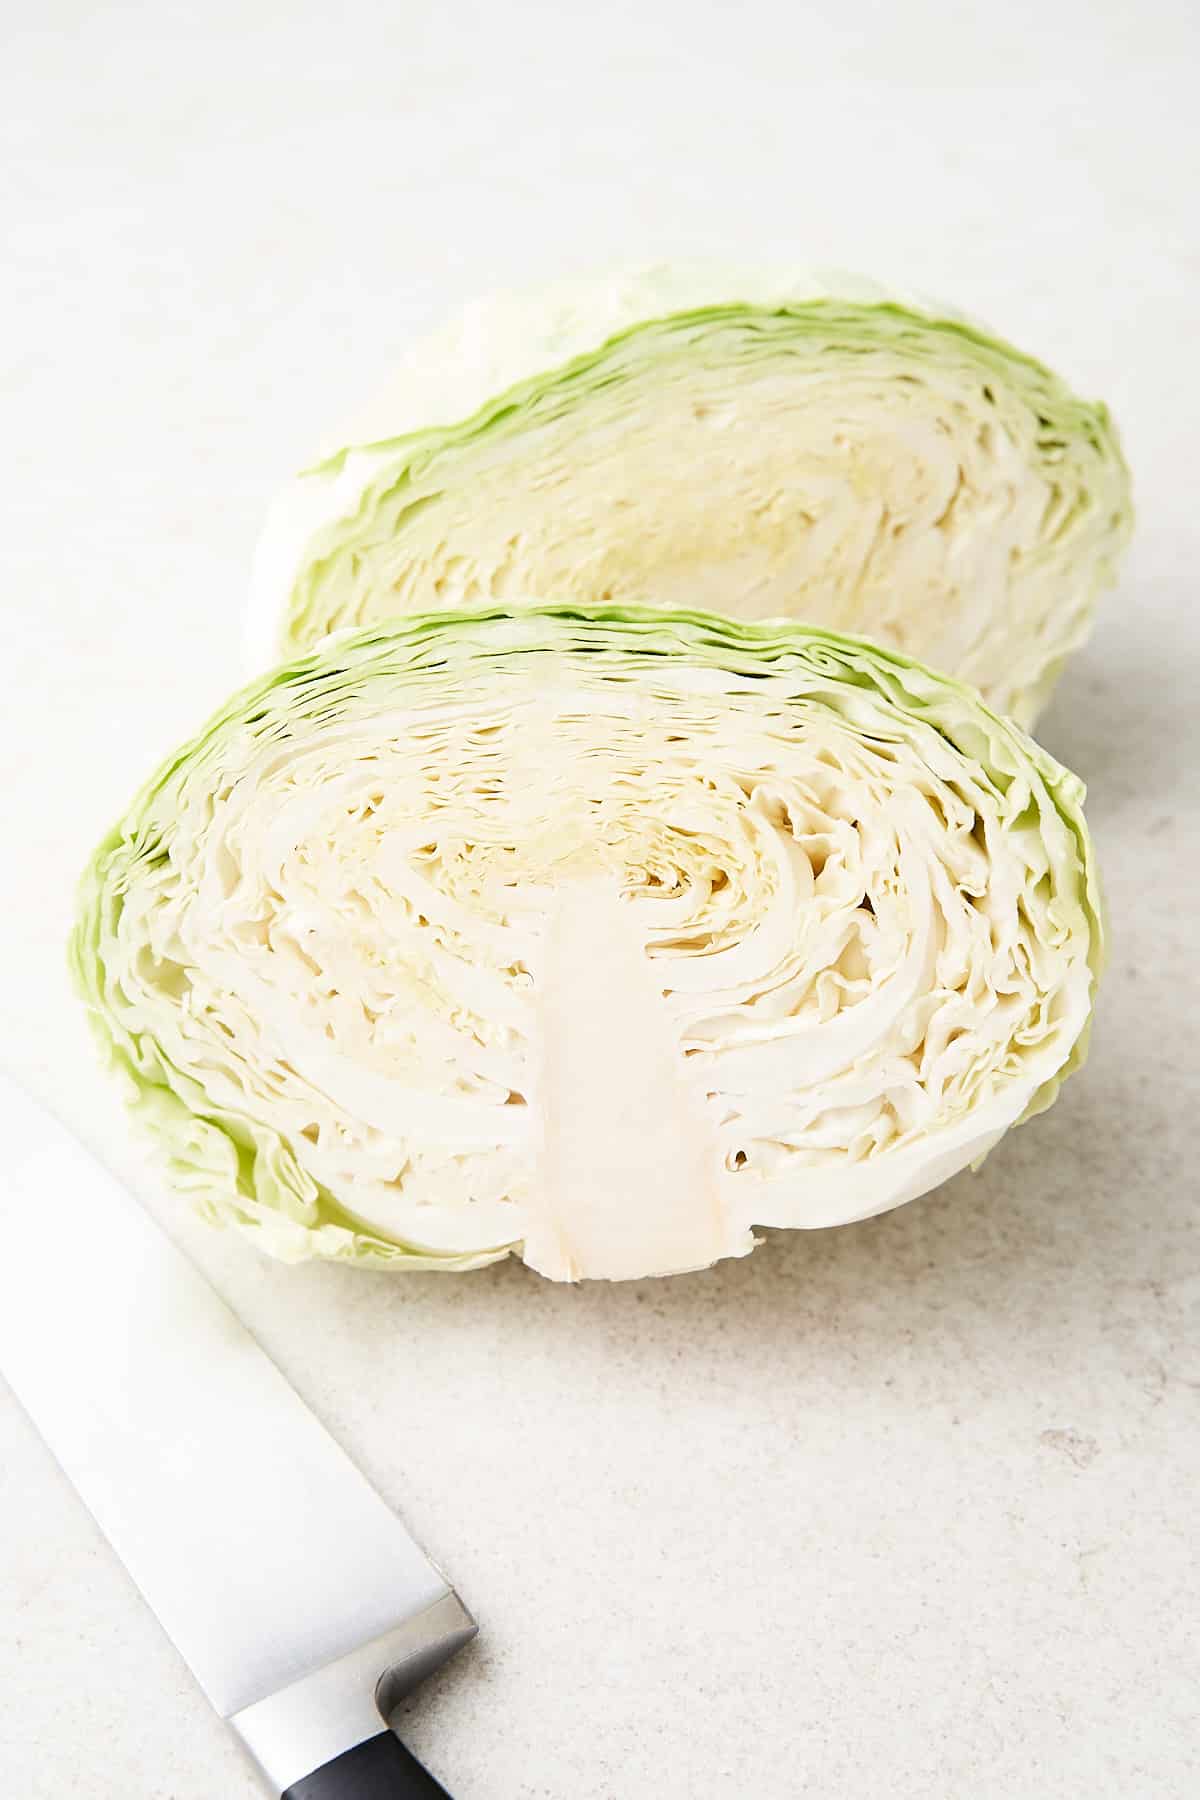 Cabbage cut in half on a table.